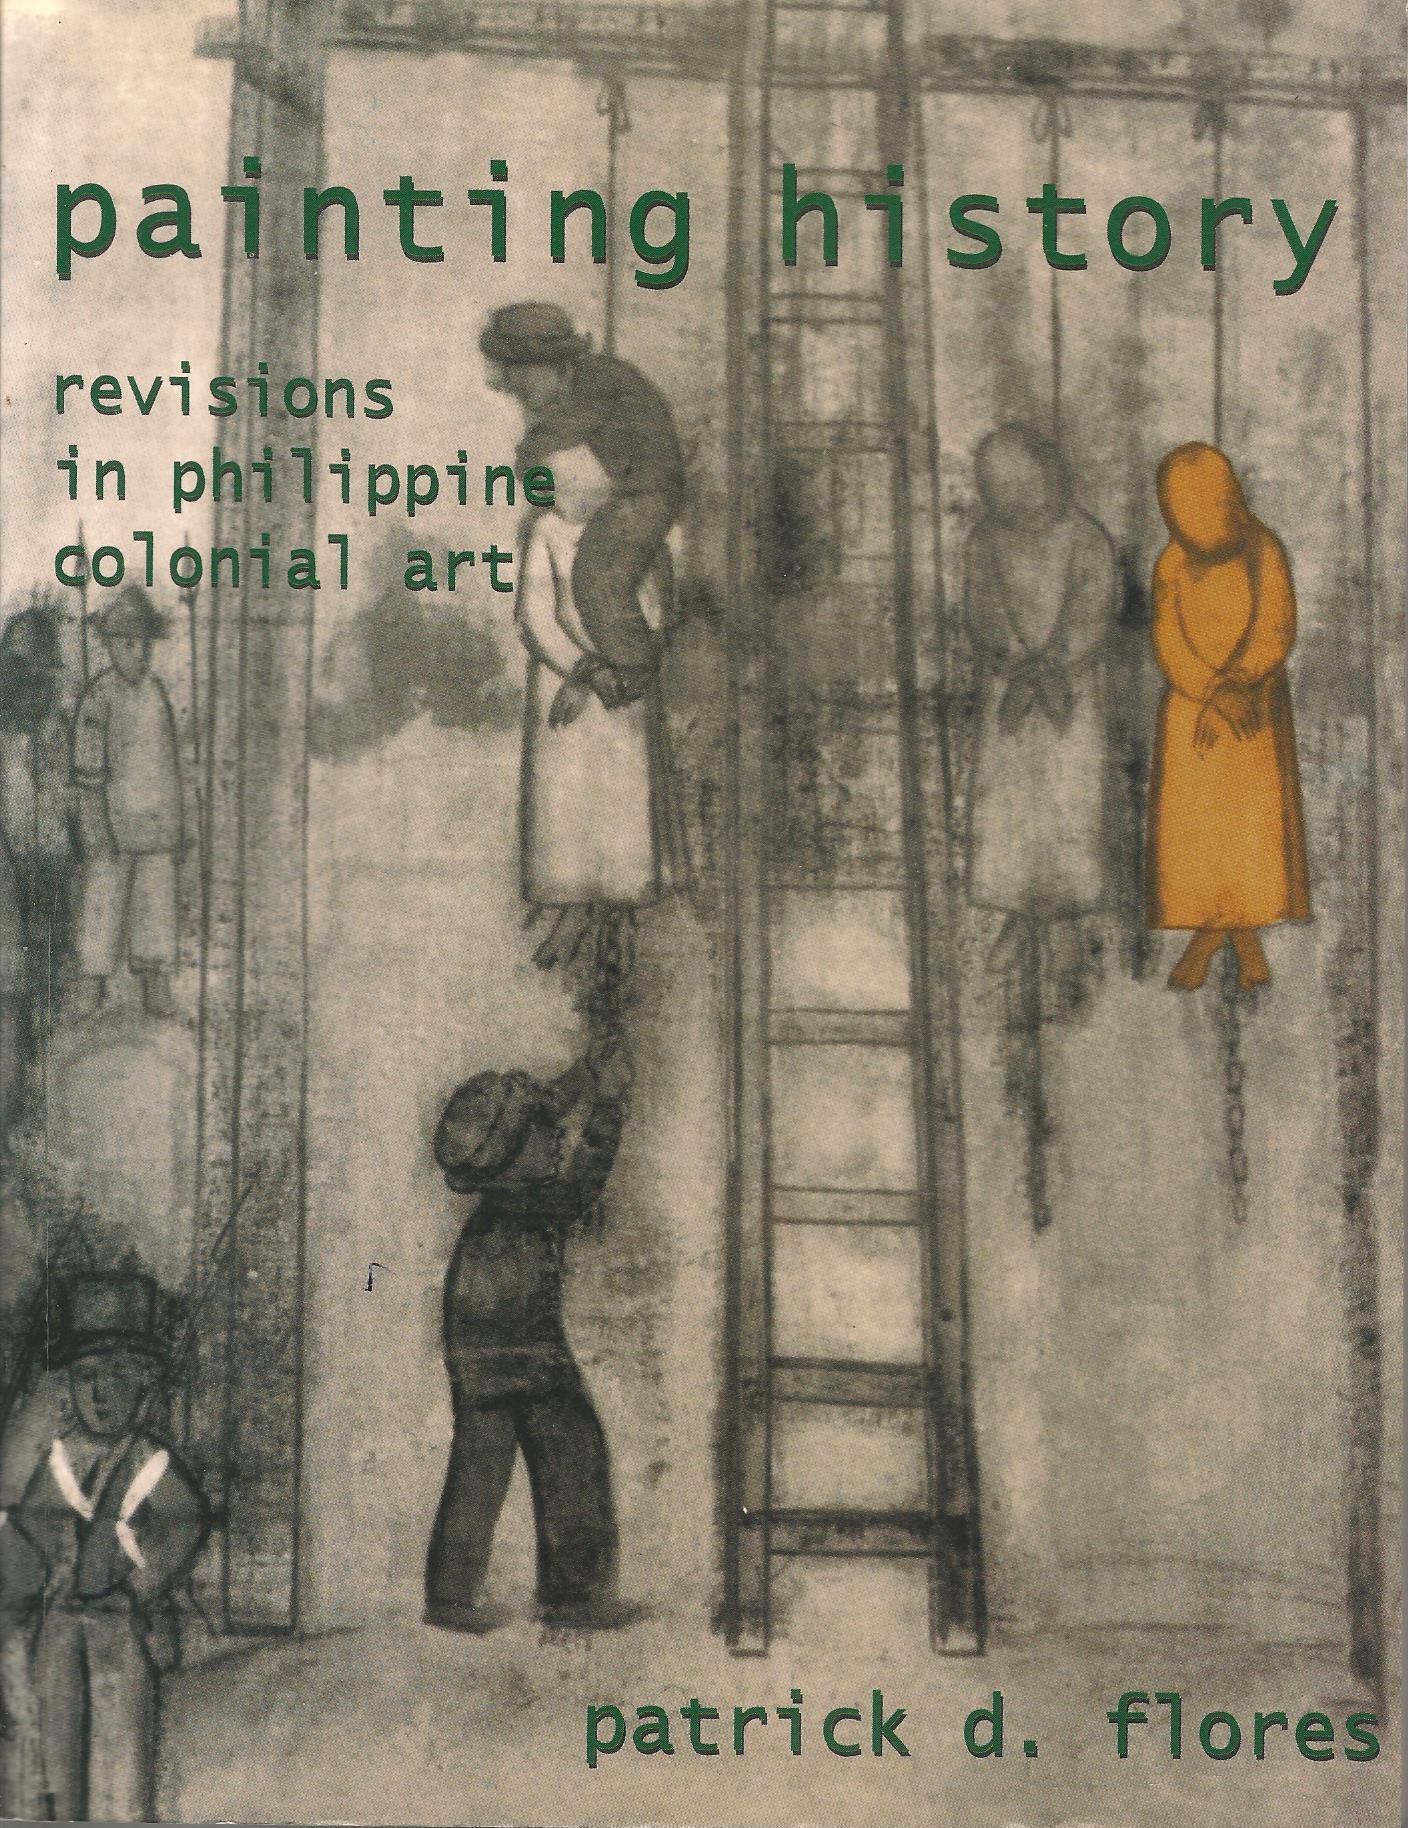 Painting history revisions in Philippine colonial art